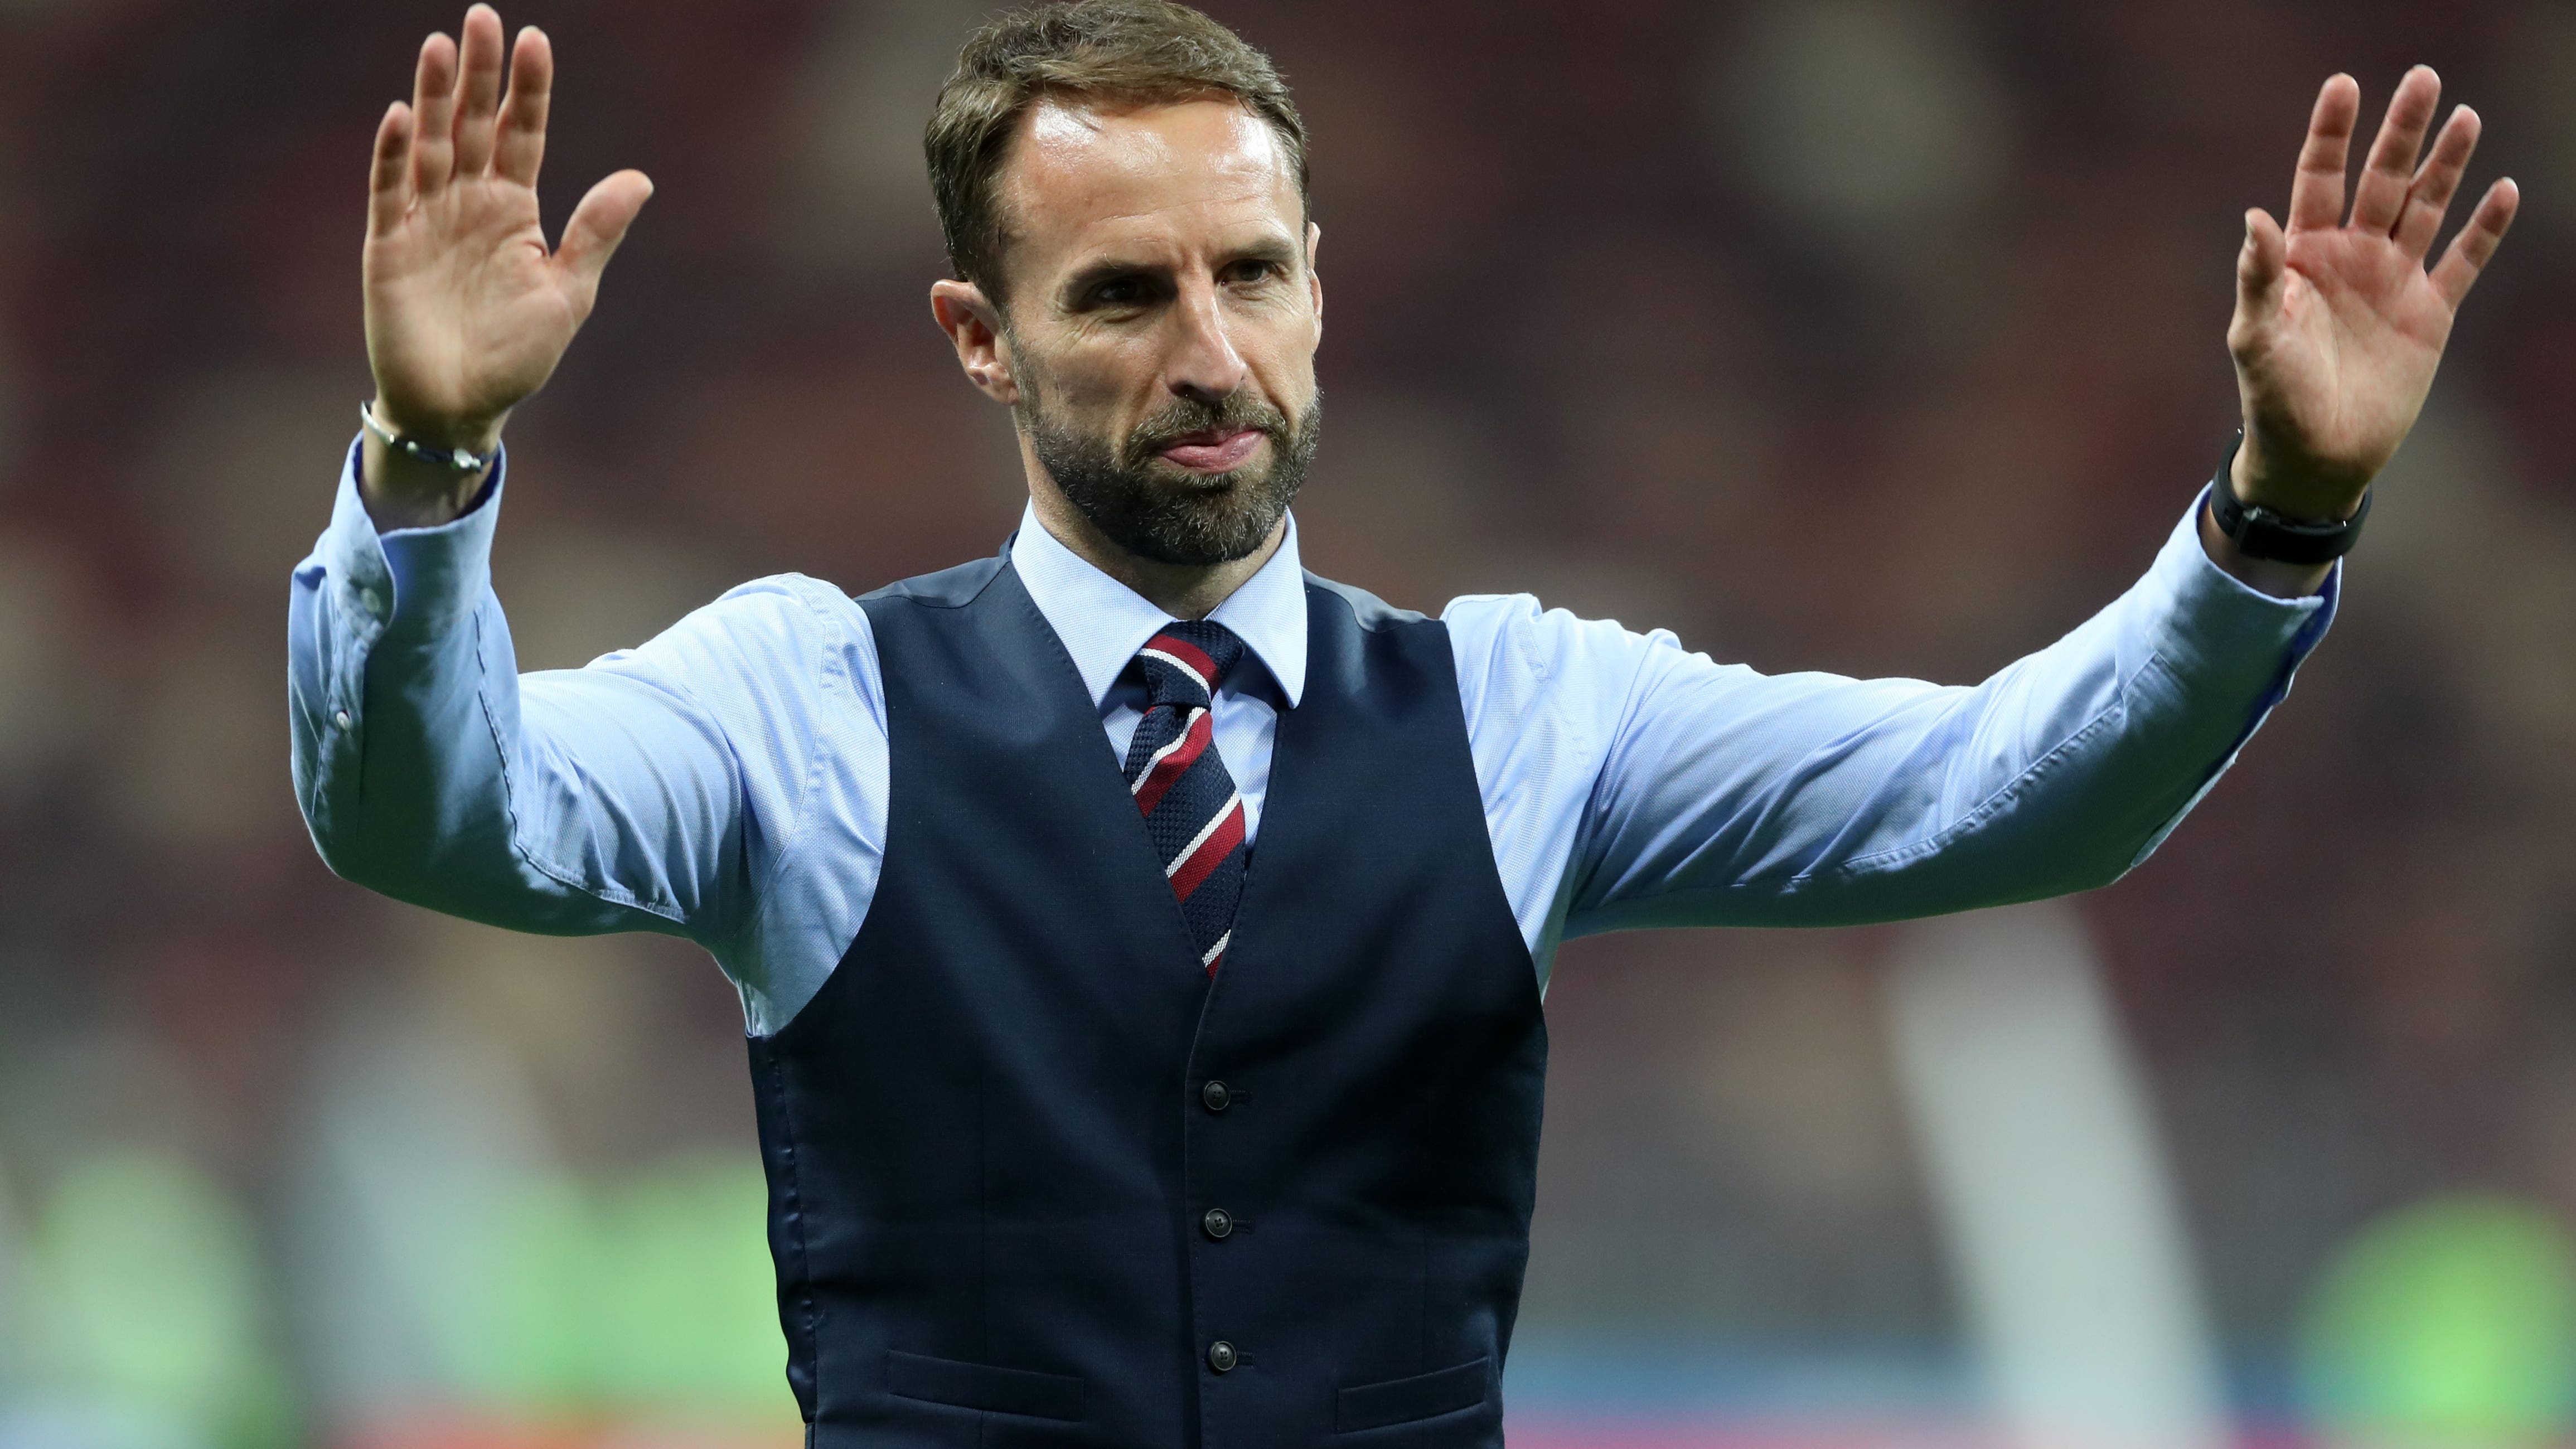 England highs and lows under Gareth Southgate